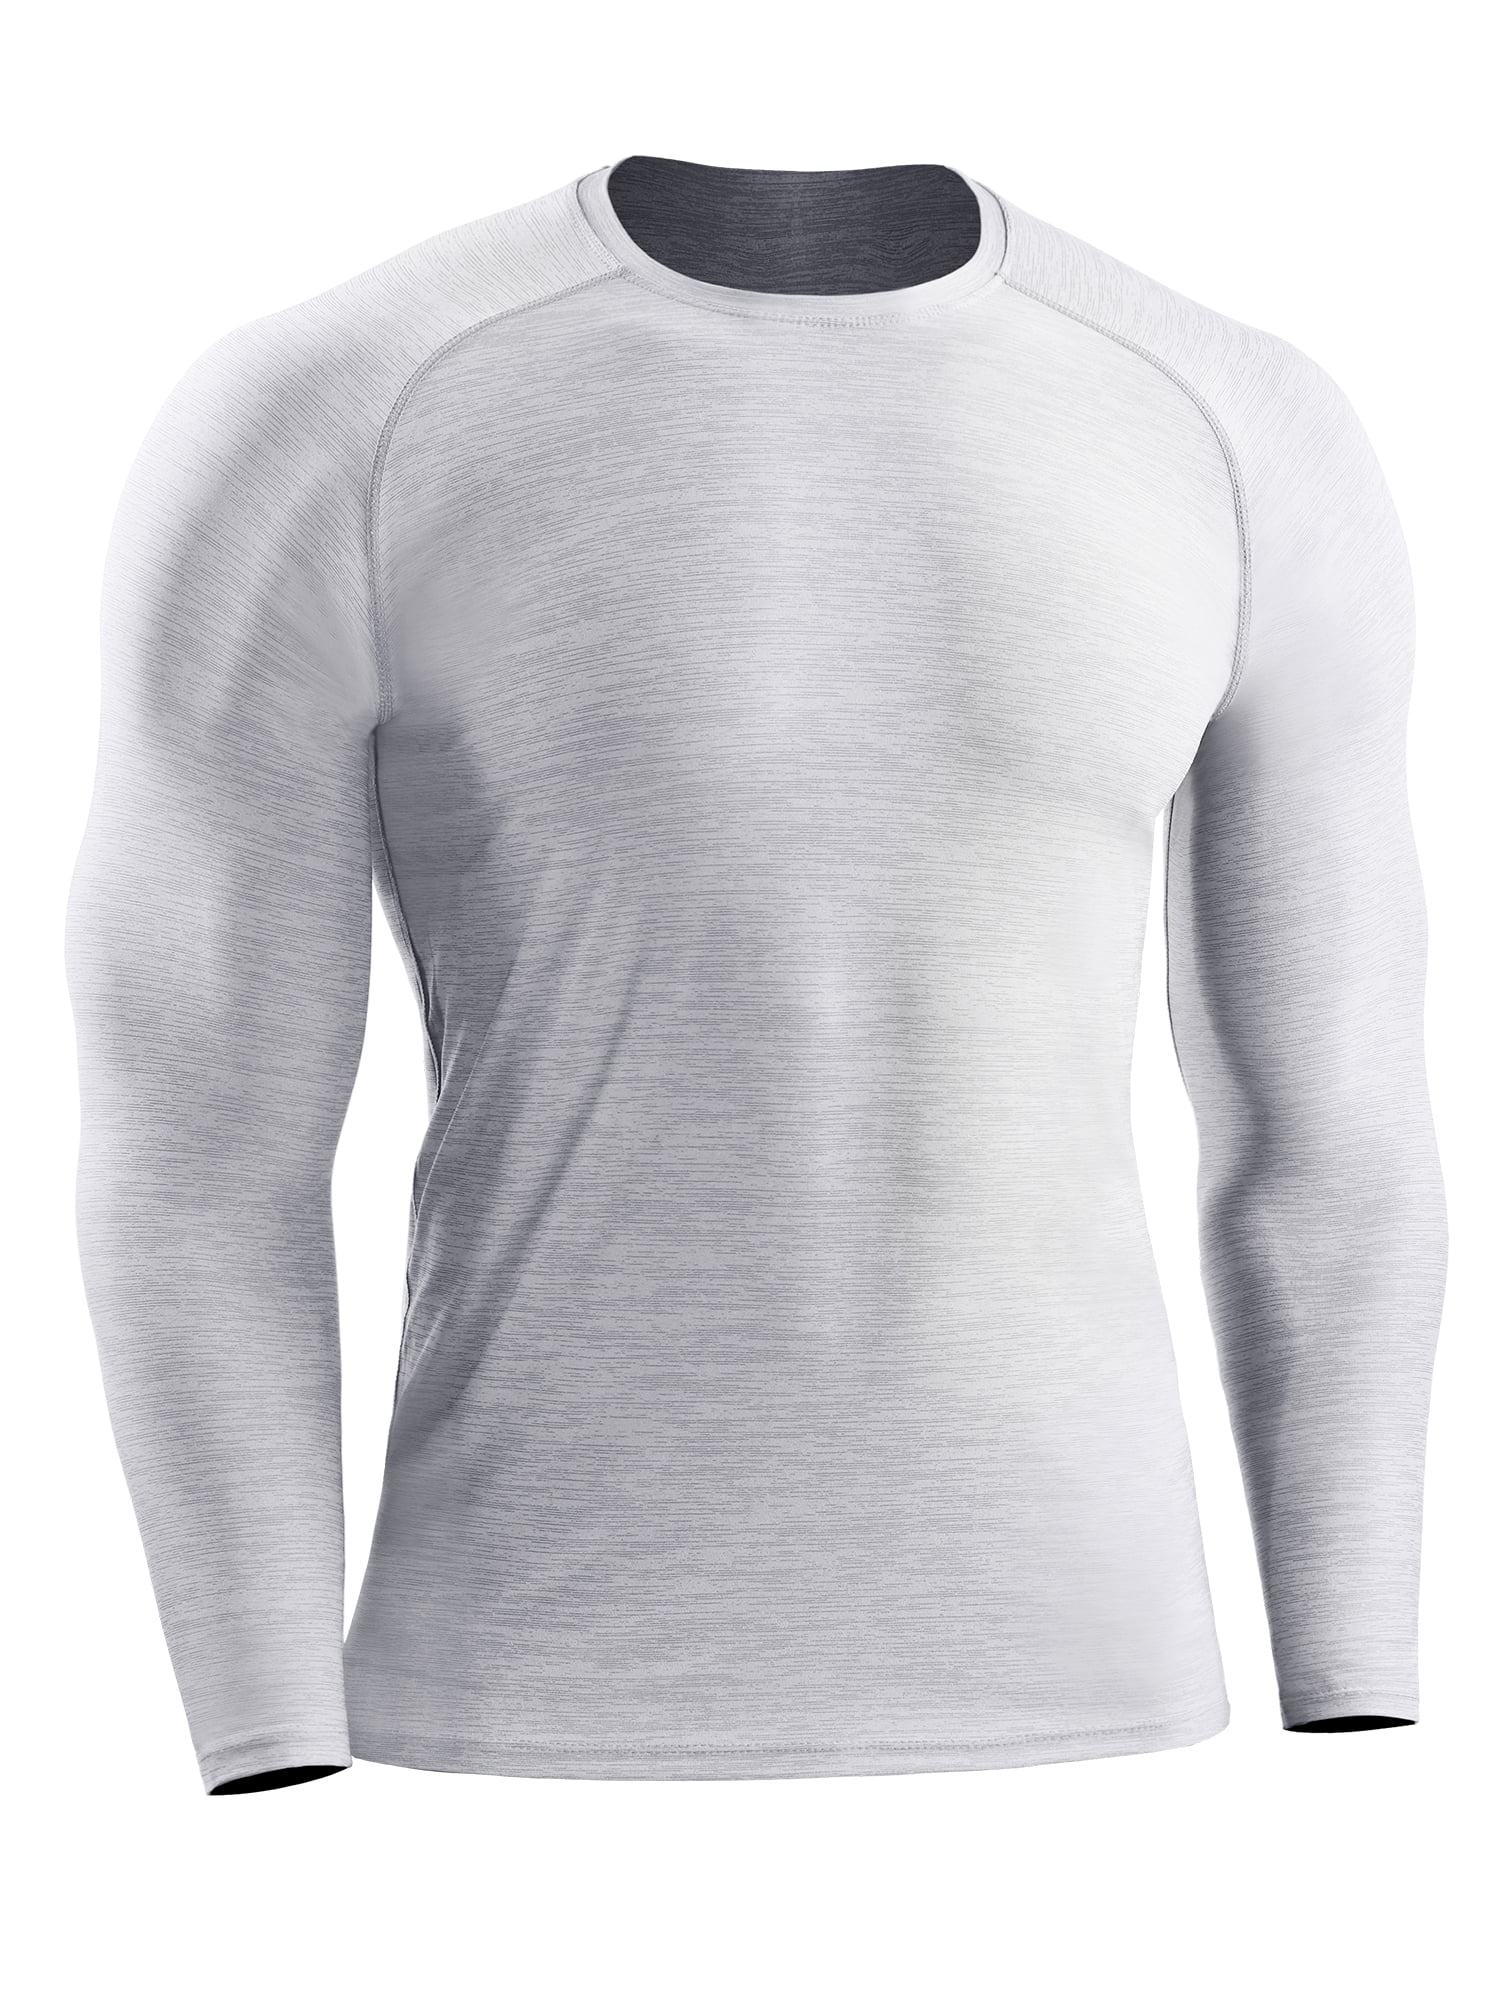 athletic workout shirts